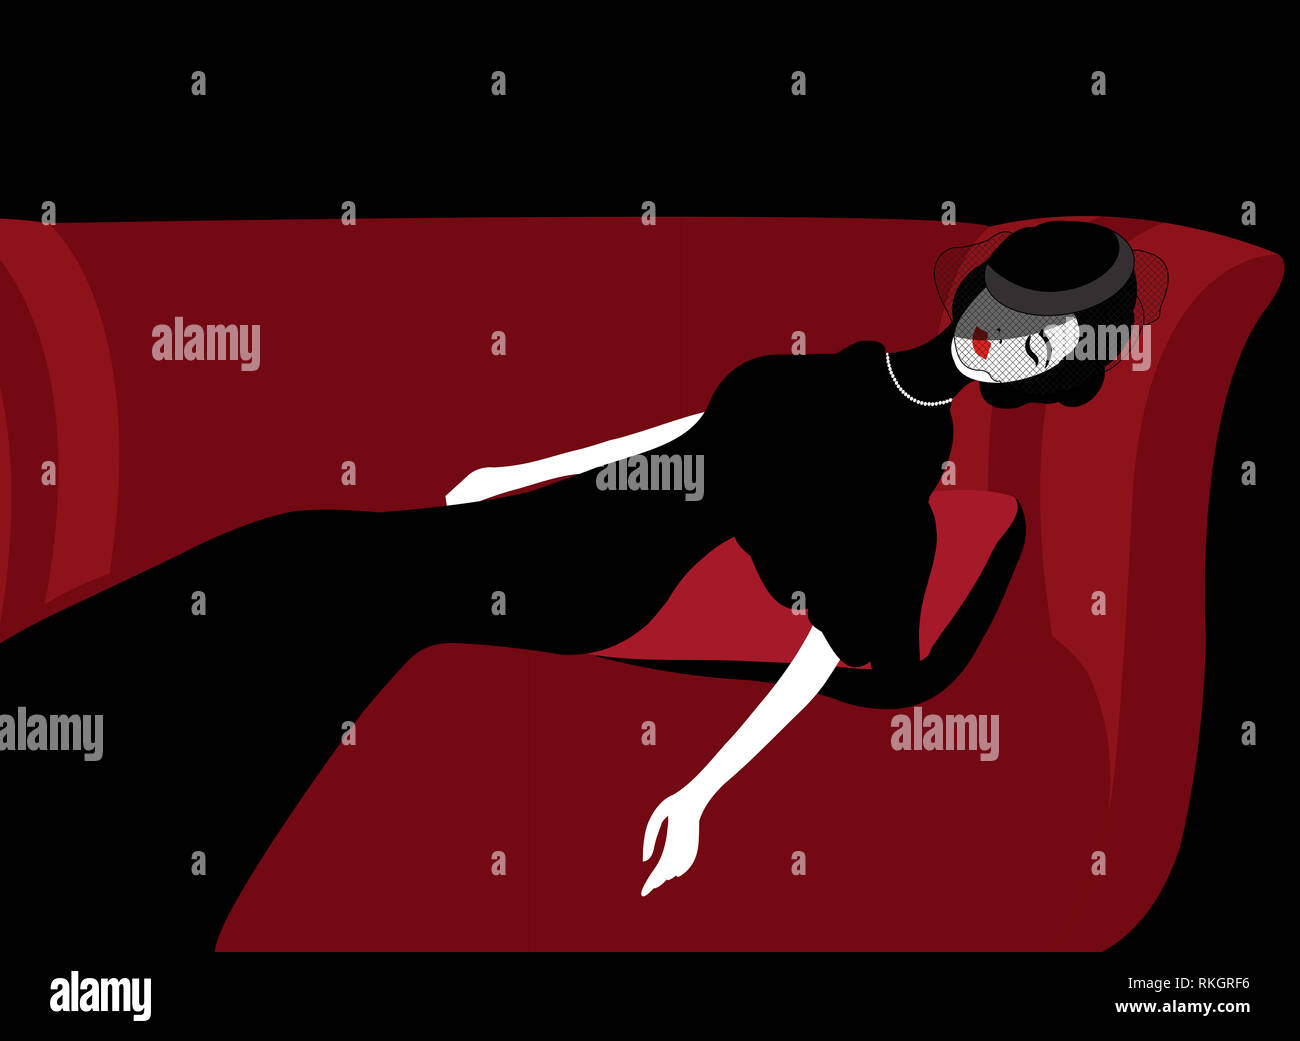 illustration of a widow sleeping on a red sofa Stock Photo